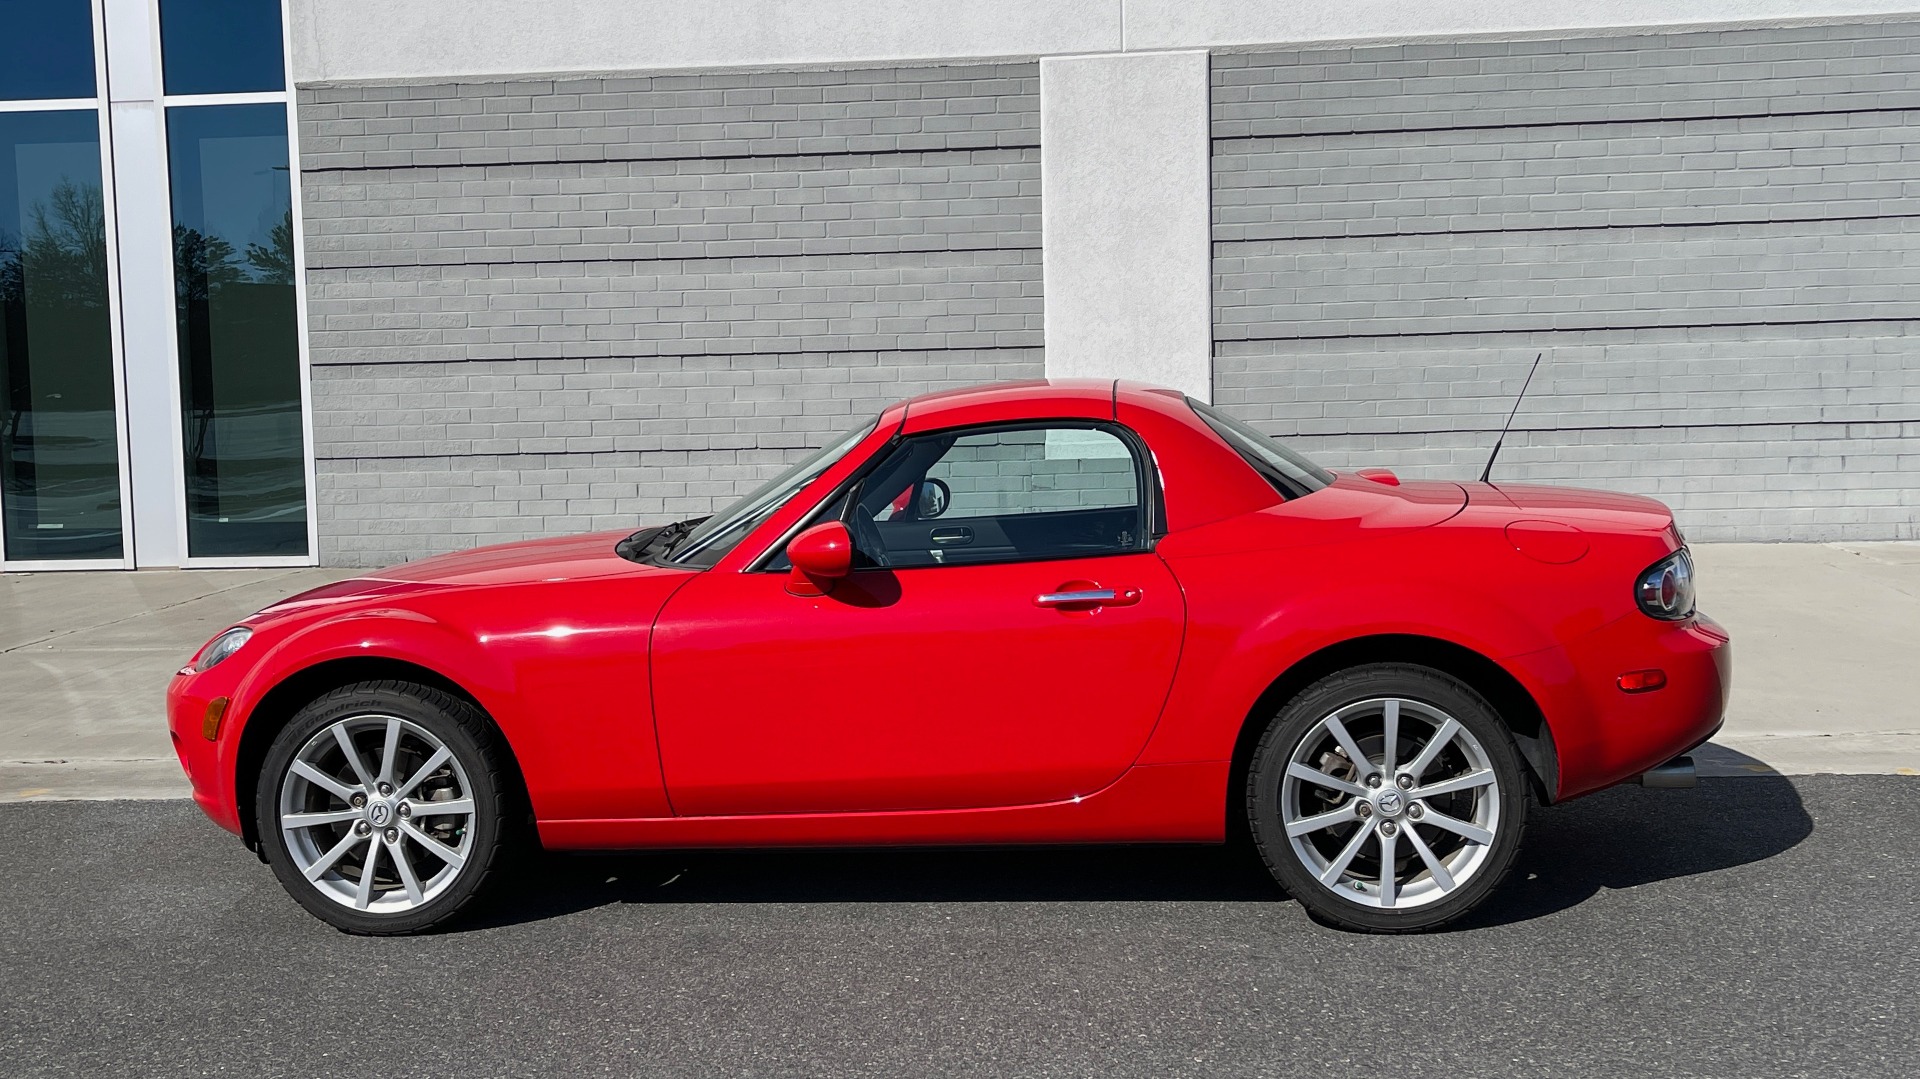 Used 2008 Mazda MX-5 MIATA GRAND TOURING / PRHT 2DR / MANUAL / 17IN ALLOY WHLS / LOW MILES for sale $20,995 at Formula Imports in Charlotte NC 28227 11